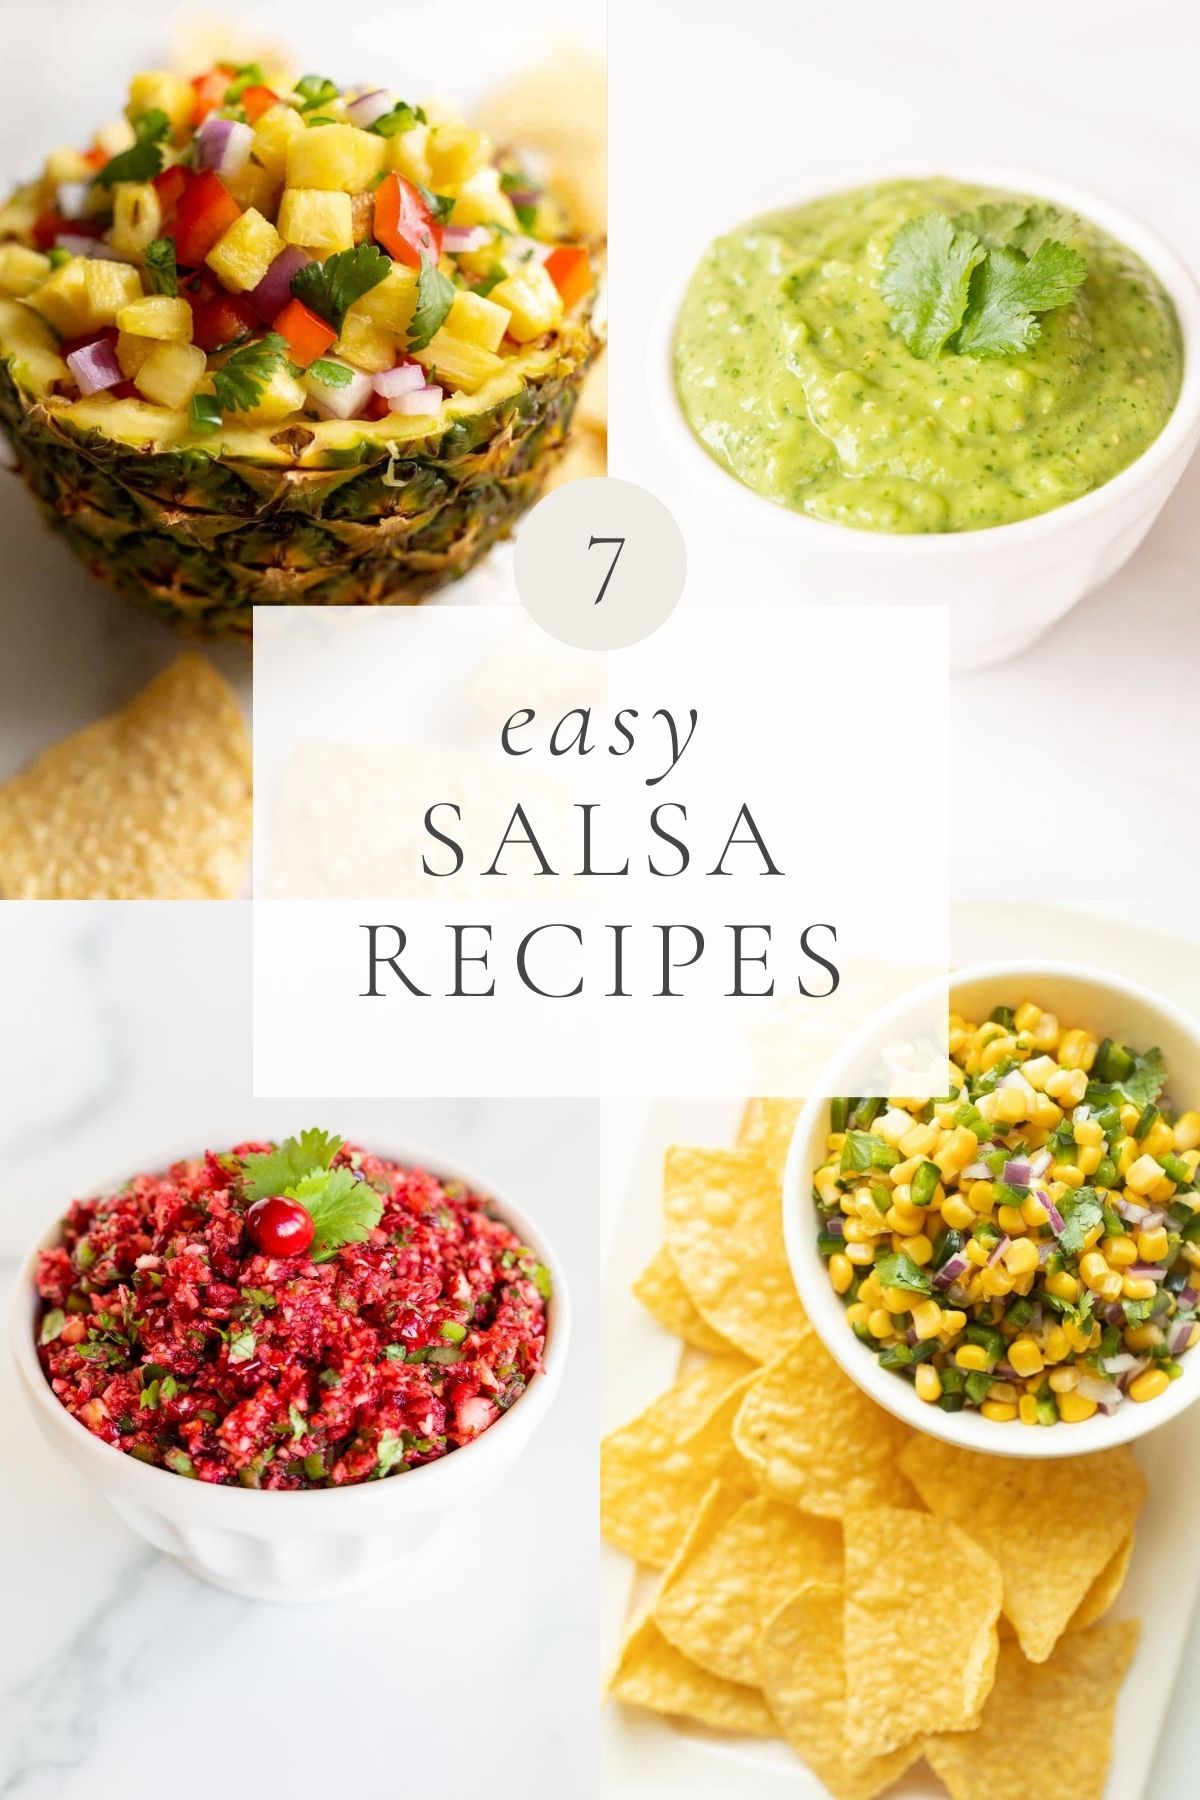 a graphic featuring salsa in various settings, with a title reading "7 easy salsa recipes"